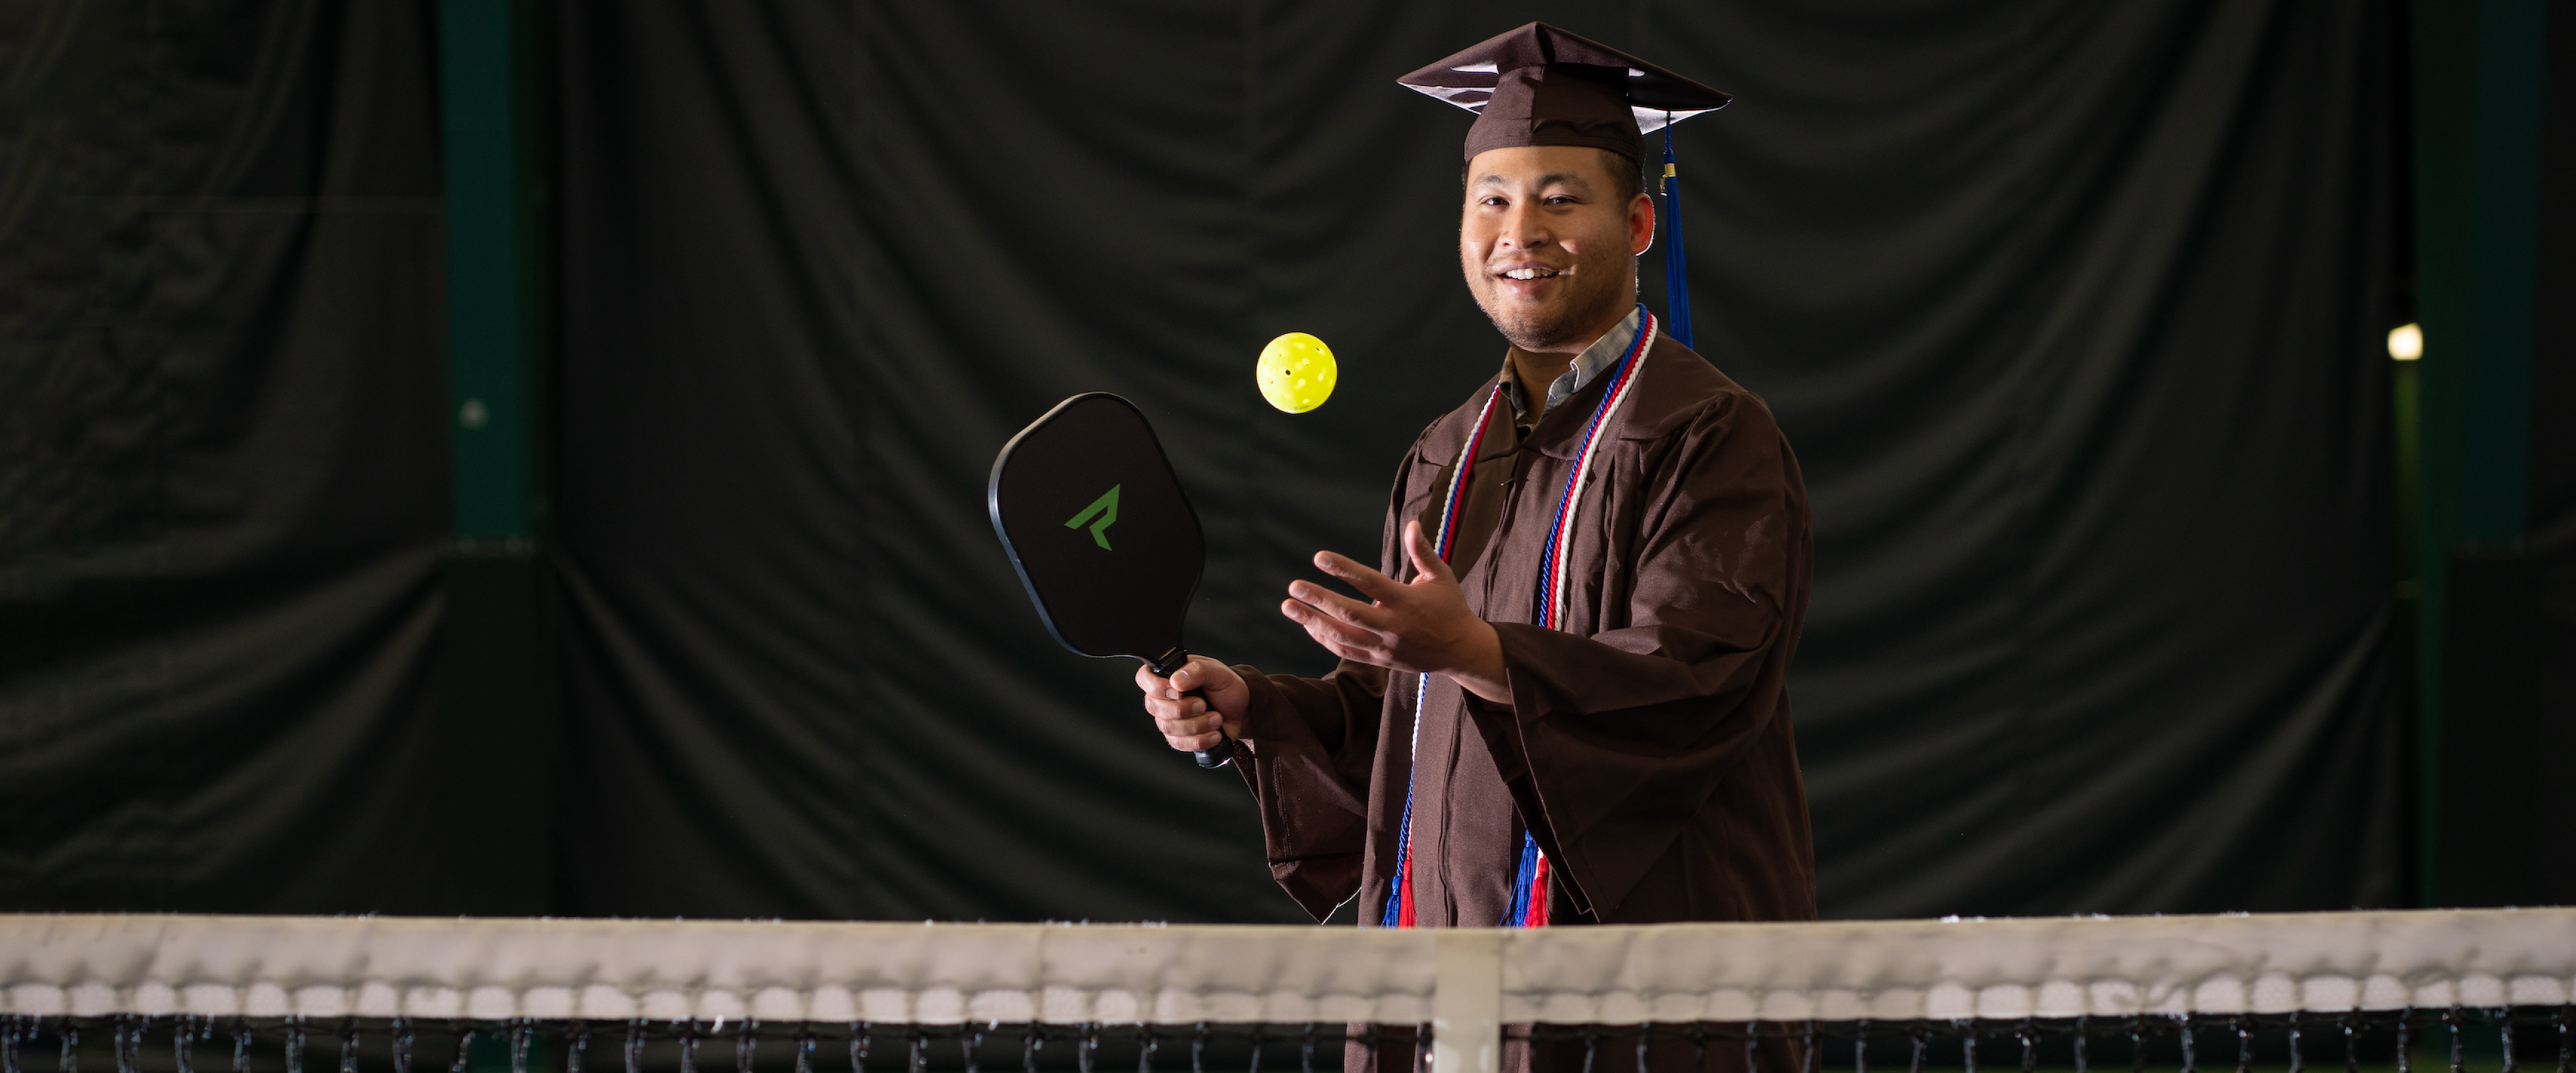 Sai Myint tosses a pickleball in the air, ready to serve it over the net. He is wearing his graduation cap and gown.